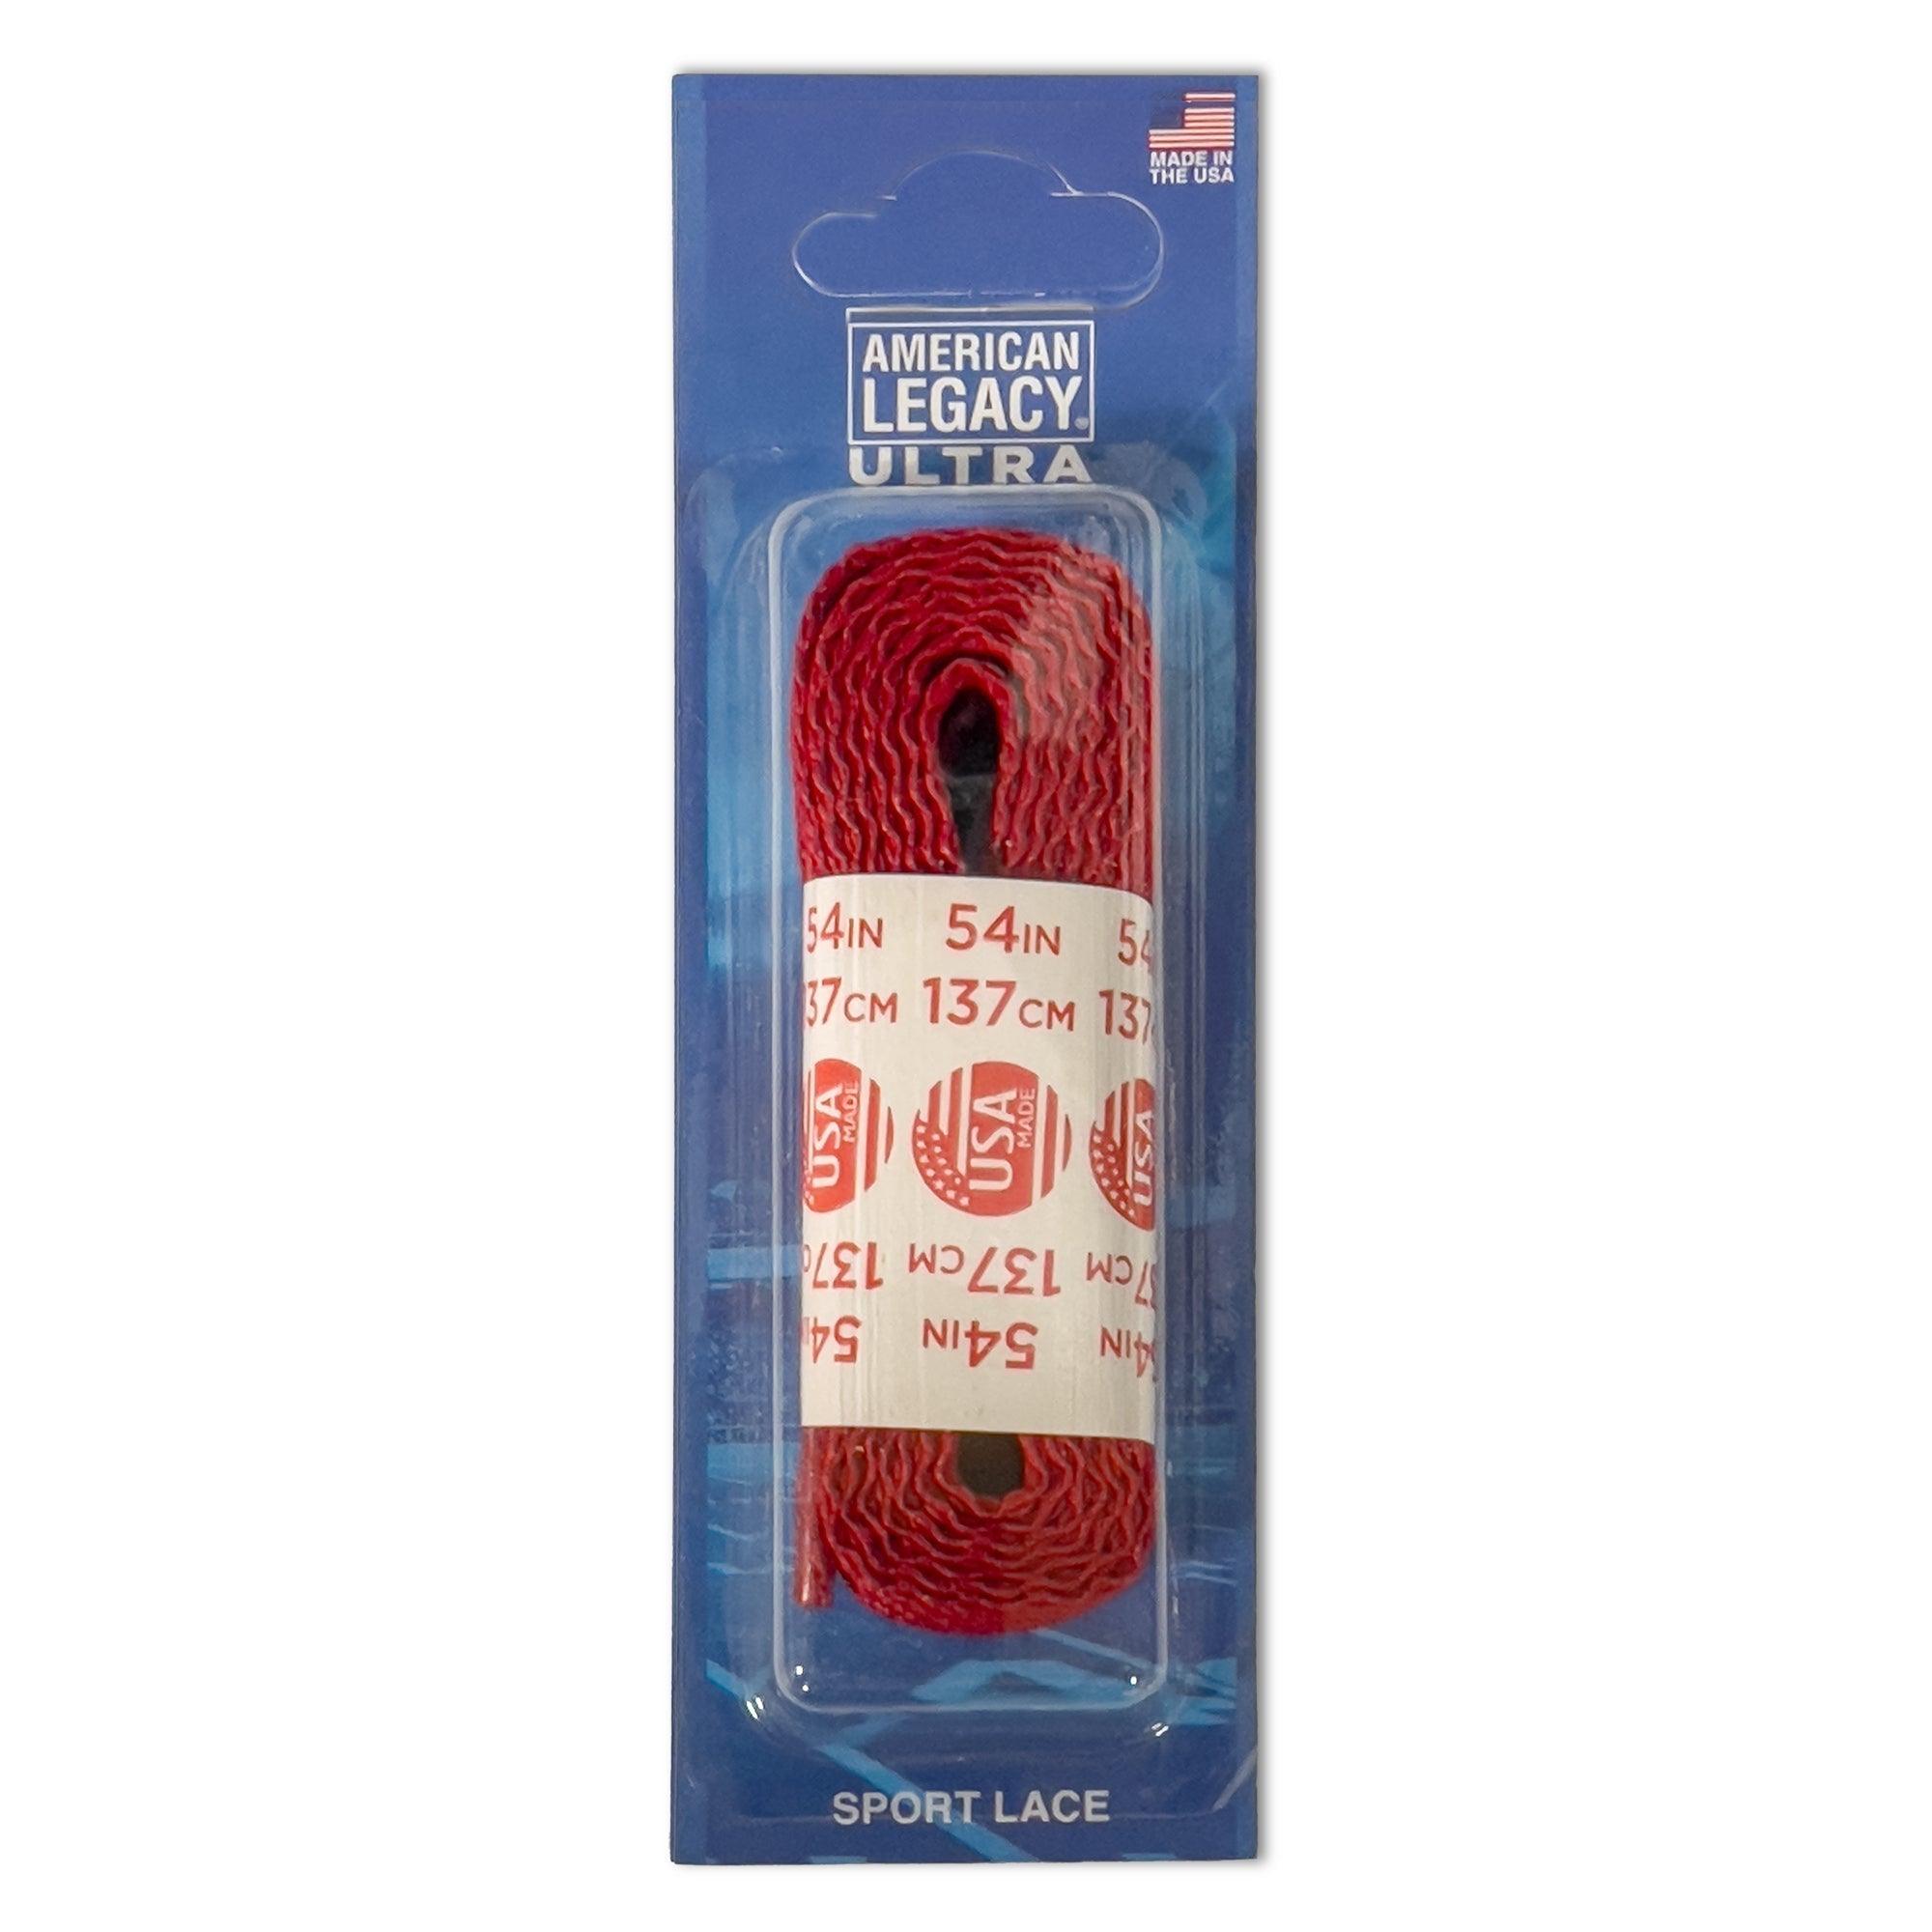 Bearfoot - Colored Laces - Merchandise